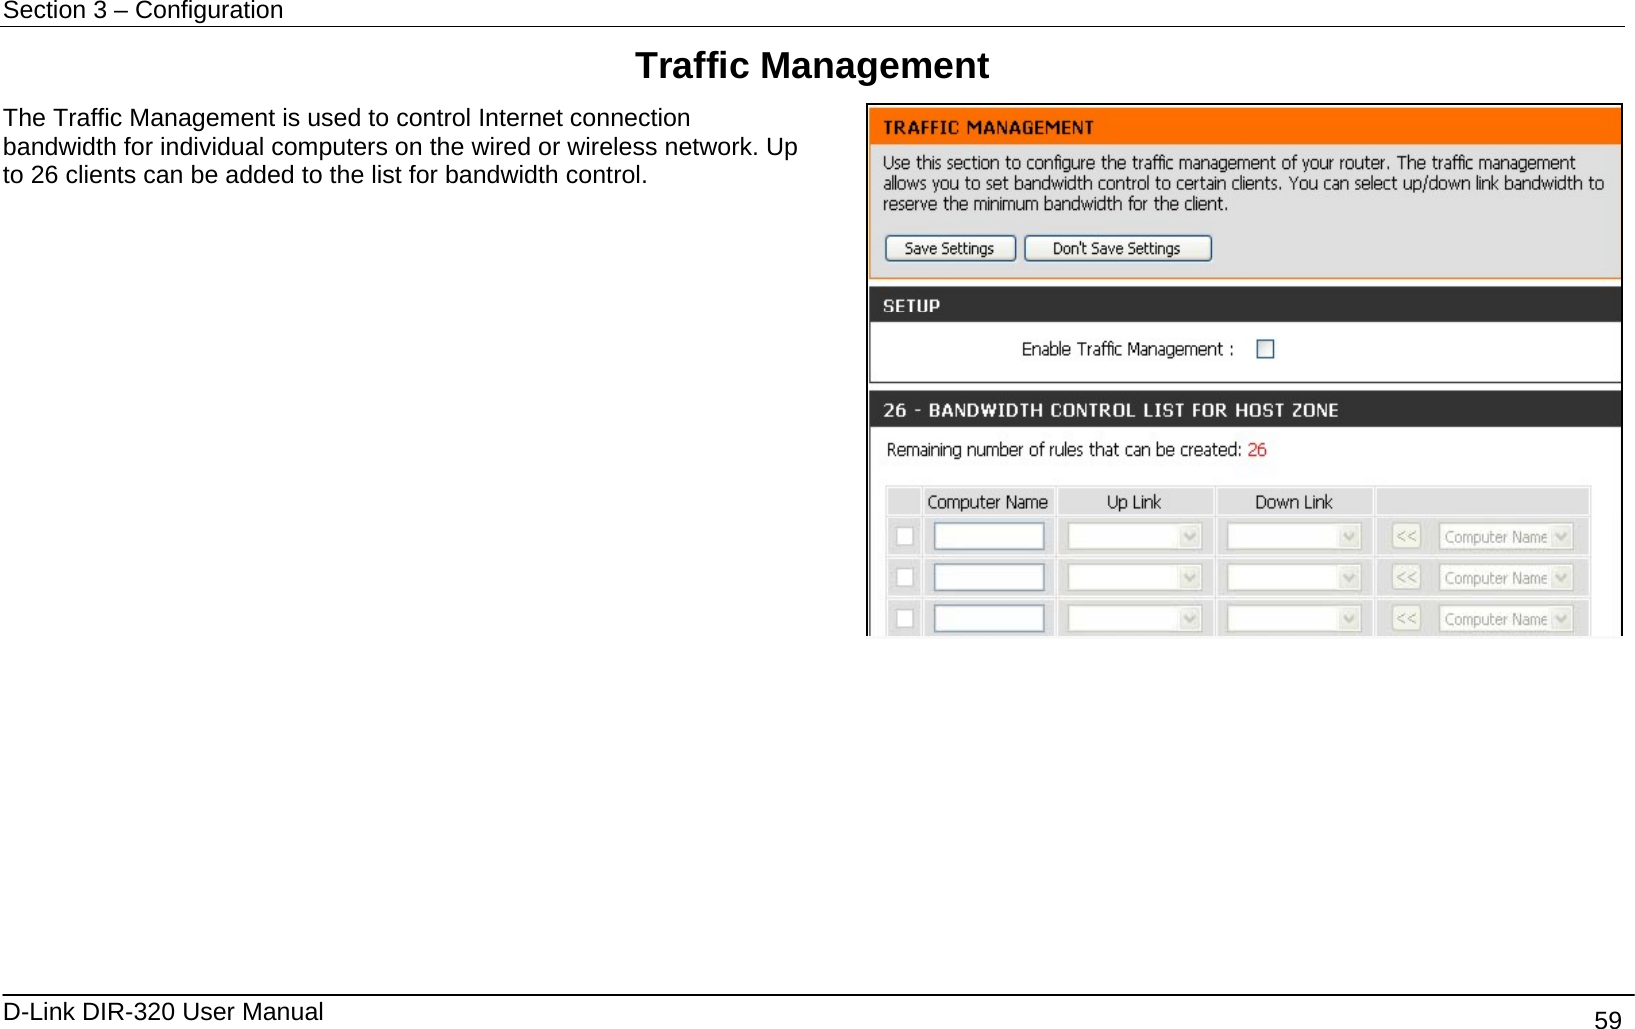 Section 3 – Configuration   D-Link DIR-320 User Manual                                       59 Traffic Management The Traffic Management is used to control Internet connection bandwidth for individual computers on the wired or wireless network. Up to 26 clients can be added to the list for bandwidth control.           